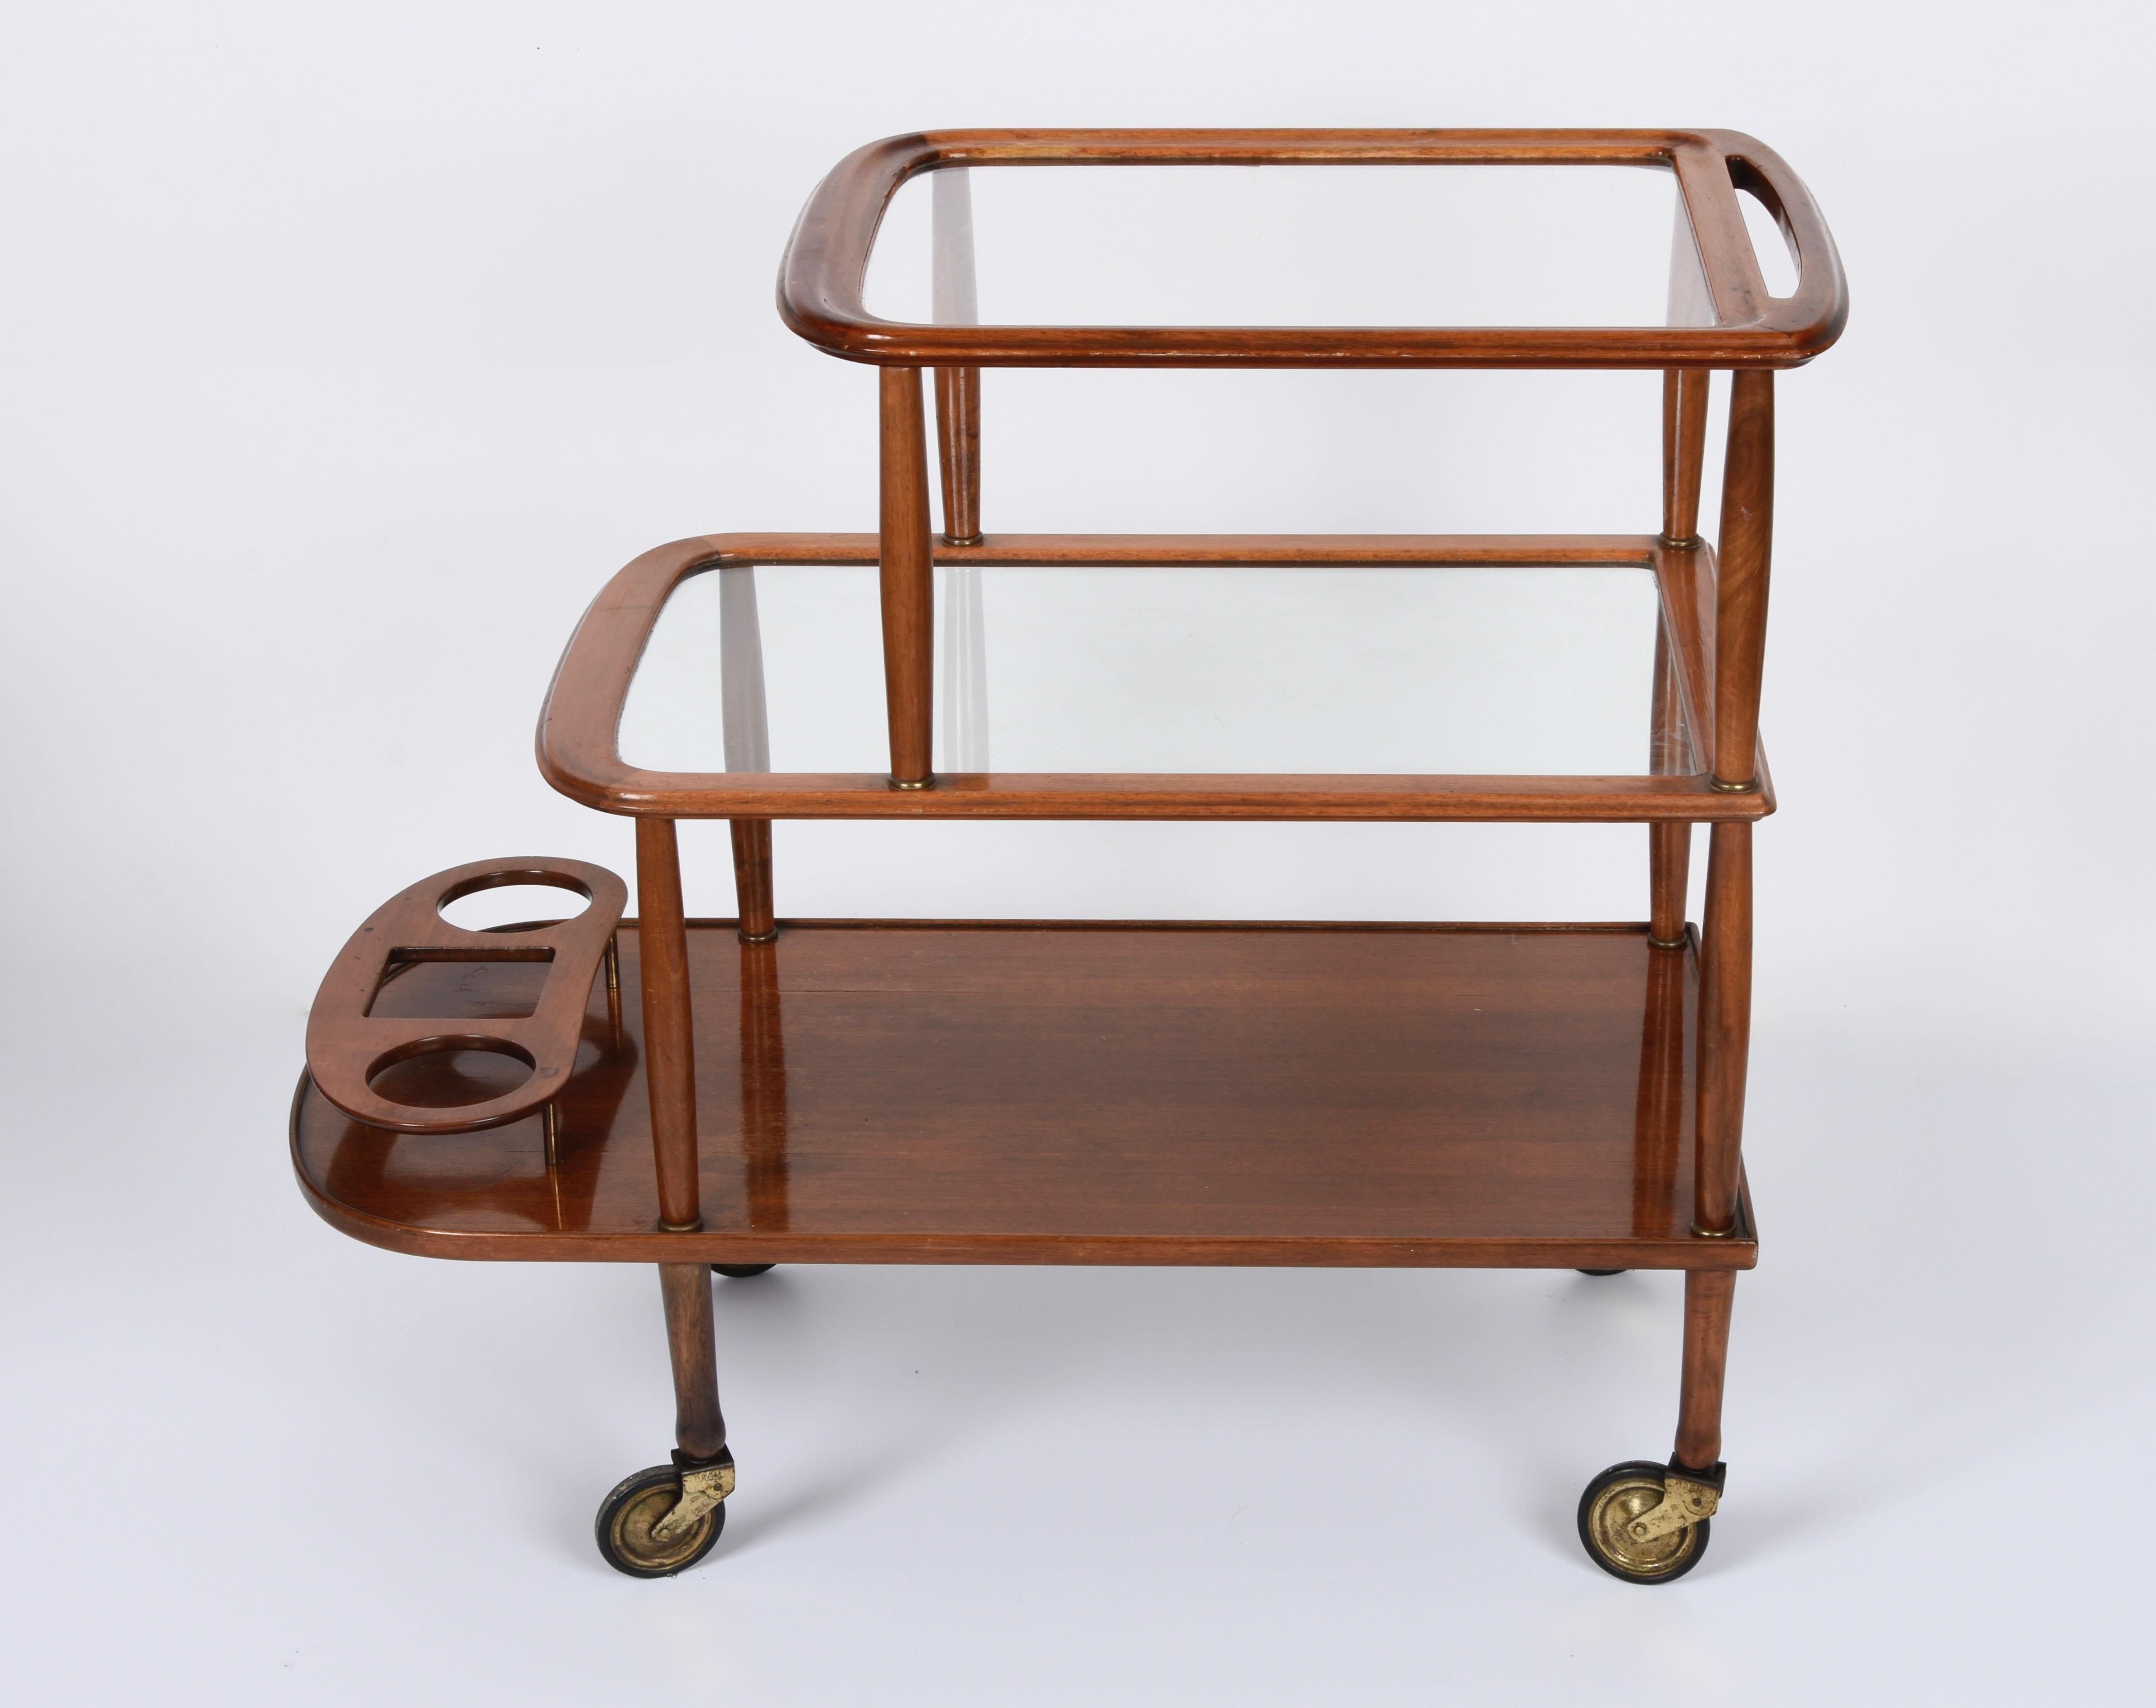 20th Century Midcentury Walnut Wood and Glass Italian Bar Cart Attributed to Lacca, 1950s